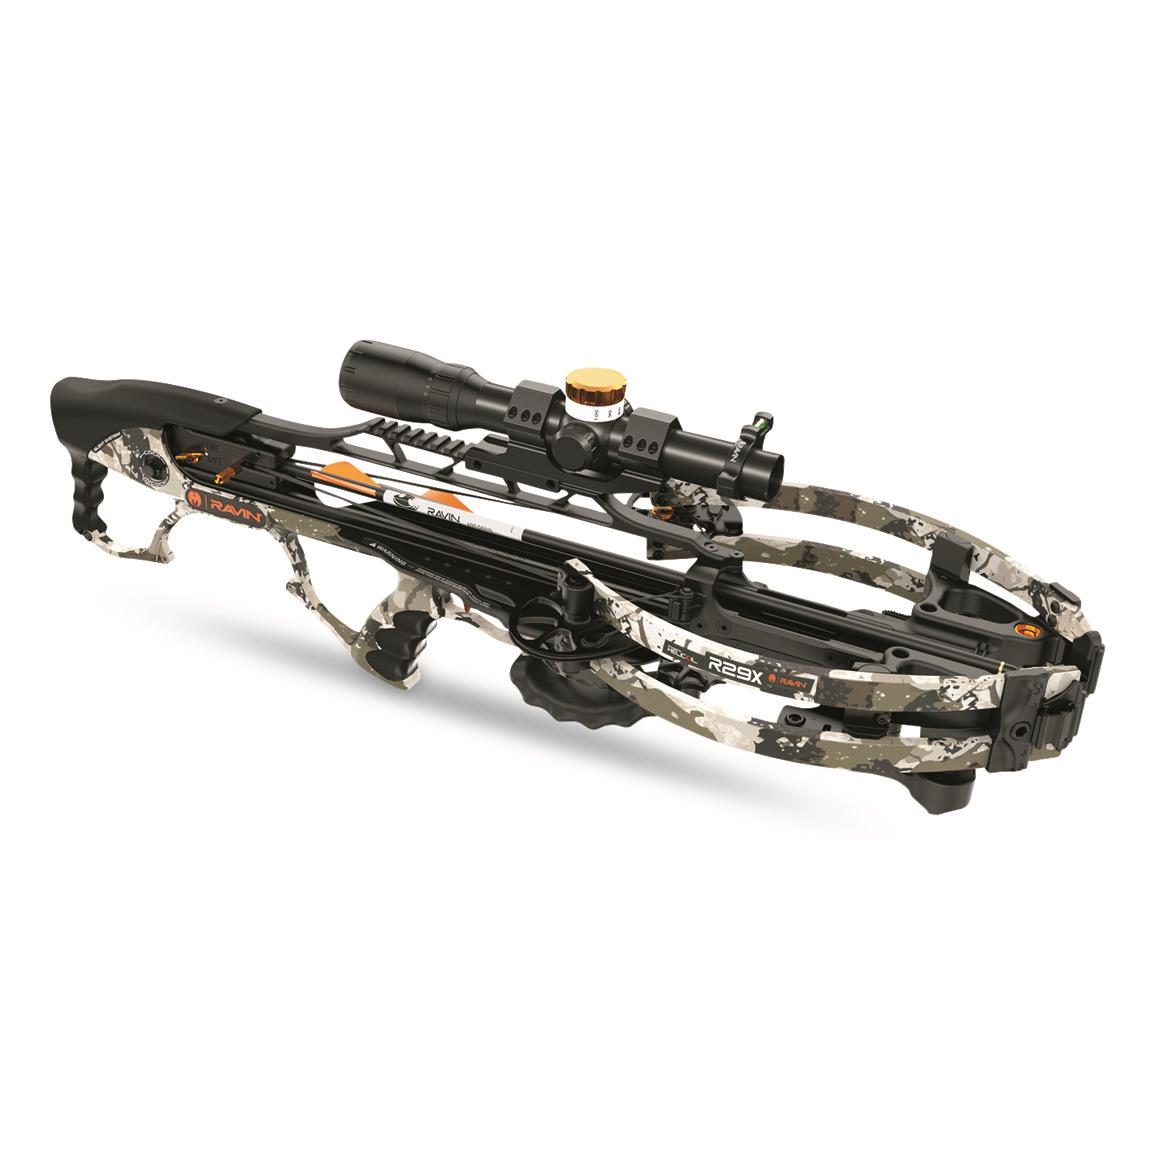 Ravin R29X Crossbow Sniper Package, King's XK7 Camo